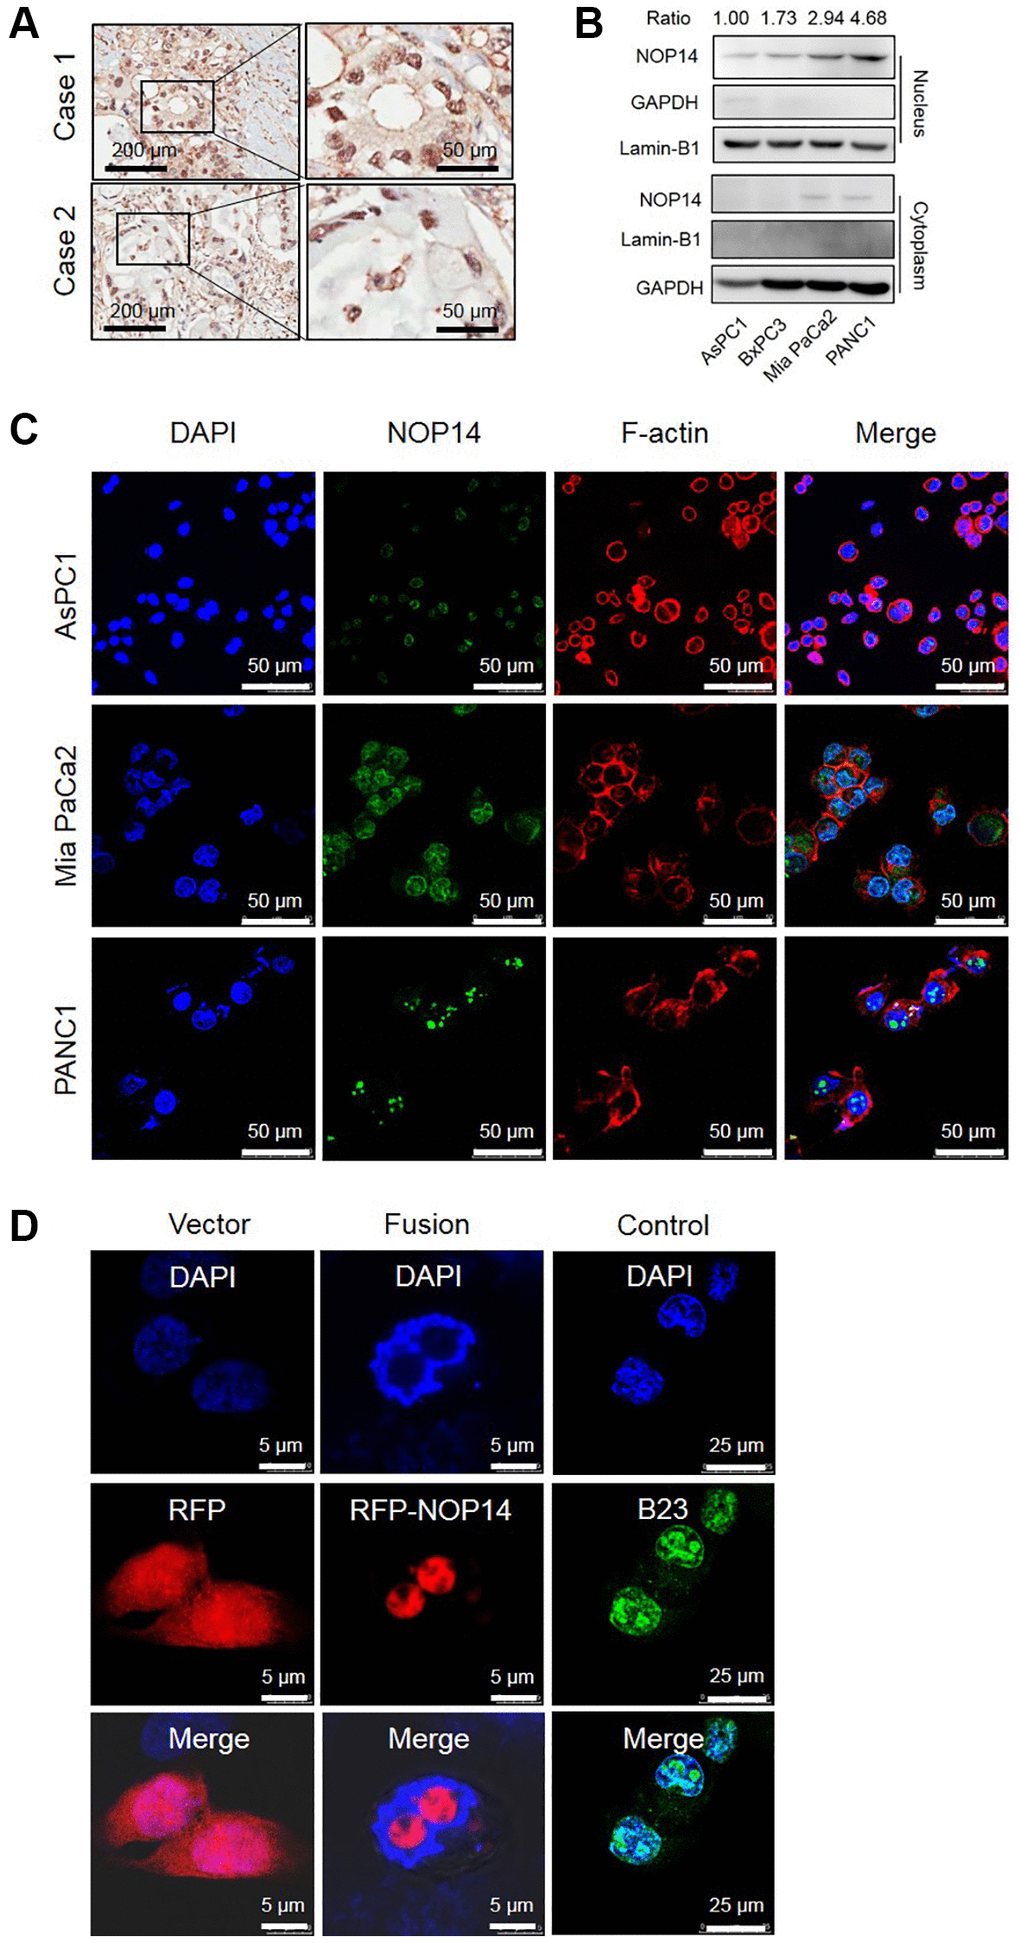 Subcellular localization of NOP14 in pancreatic cancer cells. (A) Immunohistochemical localization of NOP14 in pancreatic cancer tissues. (B) Western blot analysis of NOP14 in the nucleus and cytoplasm of different pancreatic cancer cell lines. Lamin B1 was used as the nuclear reference, and GAPDH was used as the cytoplasmic reference. Standardized grey ratio was shown on the top representing relative expression of NOP14 in nucleus. (C) Immunofluorescence analysis of NOP14 in pancreatic cancer cells under magnification 200×. Blue, DAPI-labeled nuclei; green, FITC-labeled anti-NOP14 antibody; red, phalloidin-labeled cytoskeletal F-actin; merge, superimposition of the above three images. (D) Immunofluorescence analysis of RFP-NOP14 expression in transfected PANC1 cancer cells. Blue, DAPI-labeled nuclei; red, RFP or RFP-NOP14; green, nucleolar protein B23; merge, superimposition of the above three images.